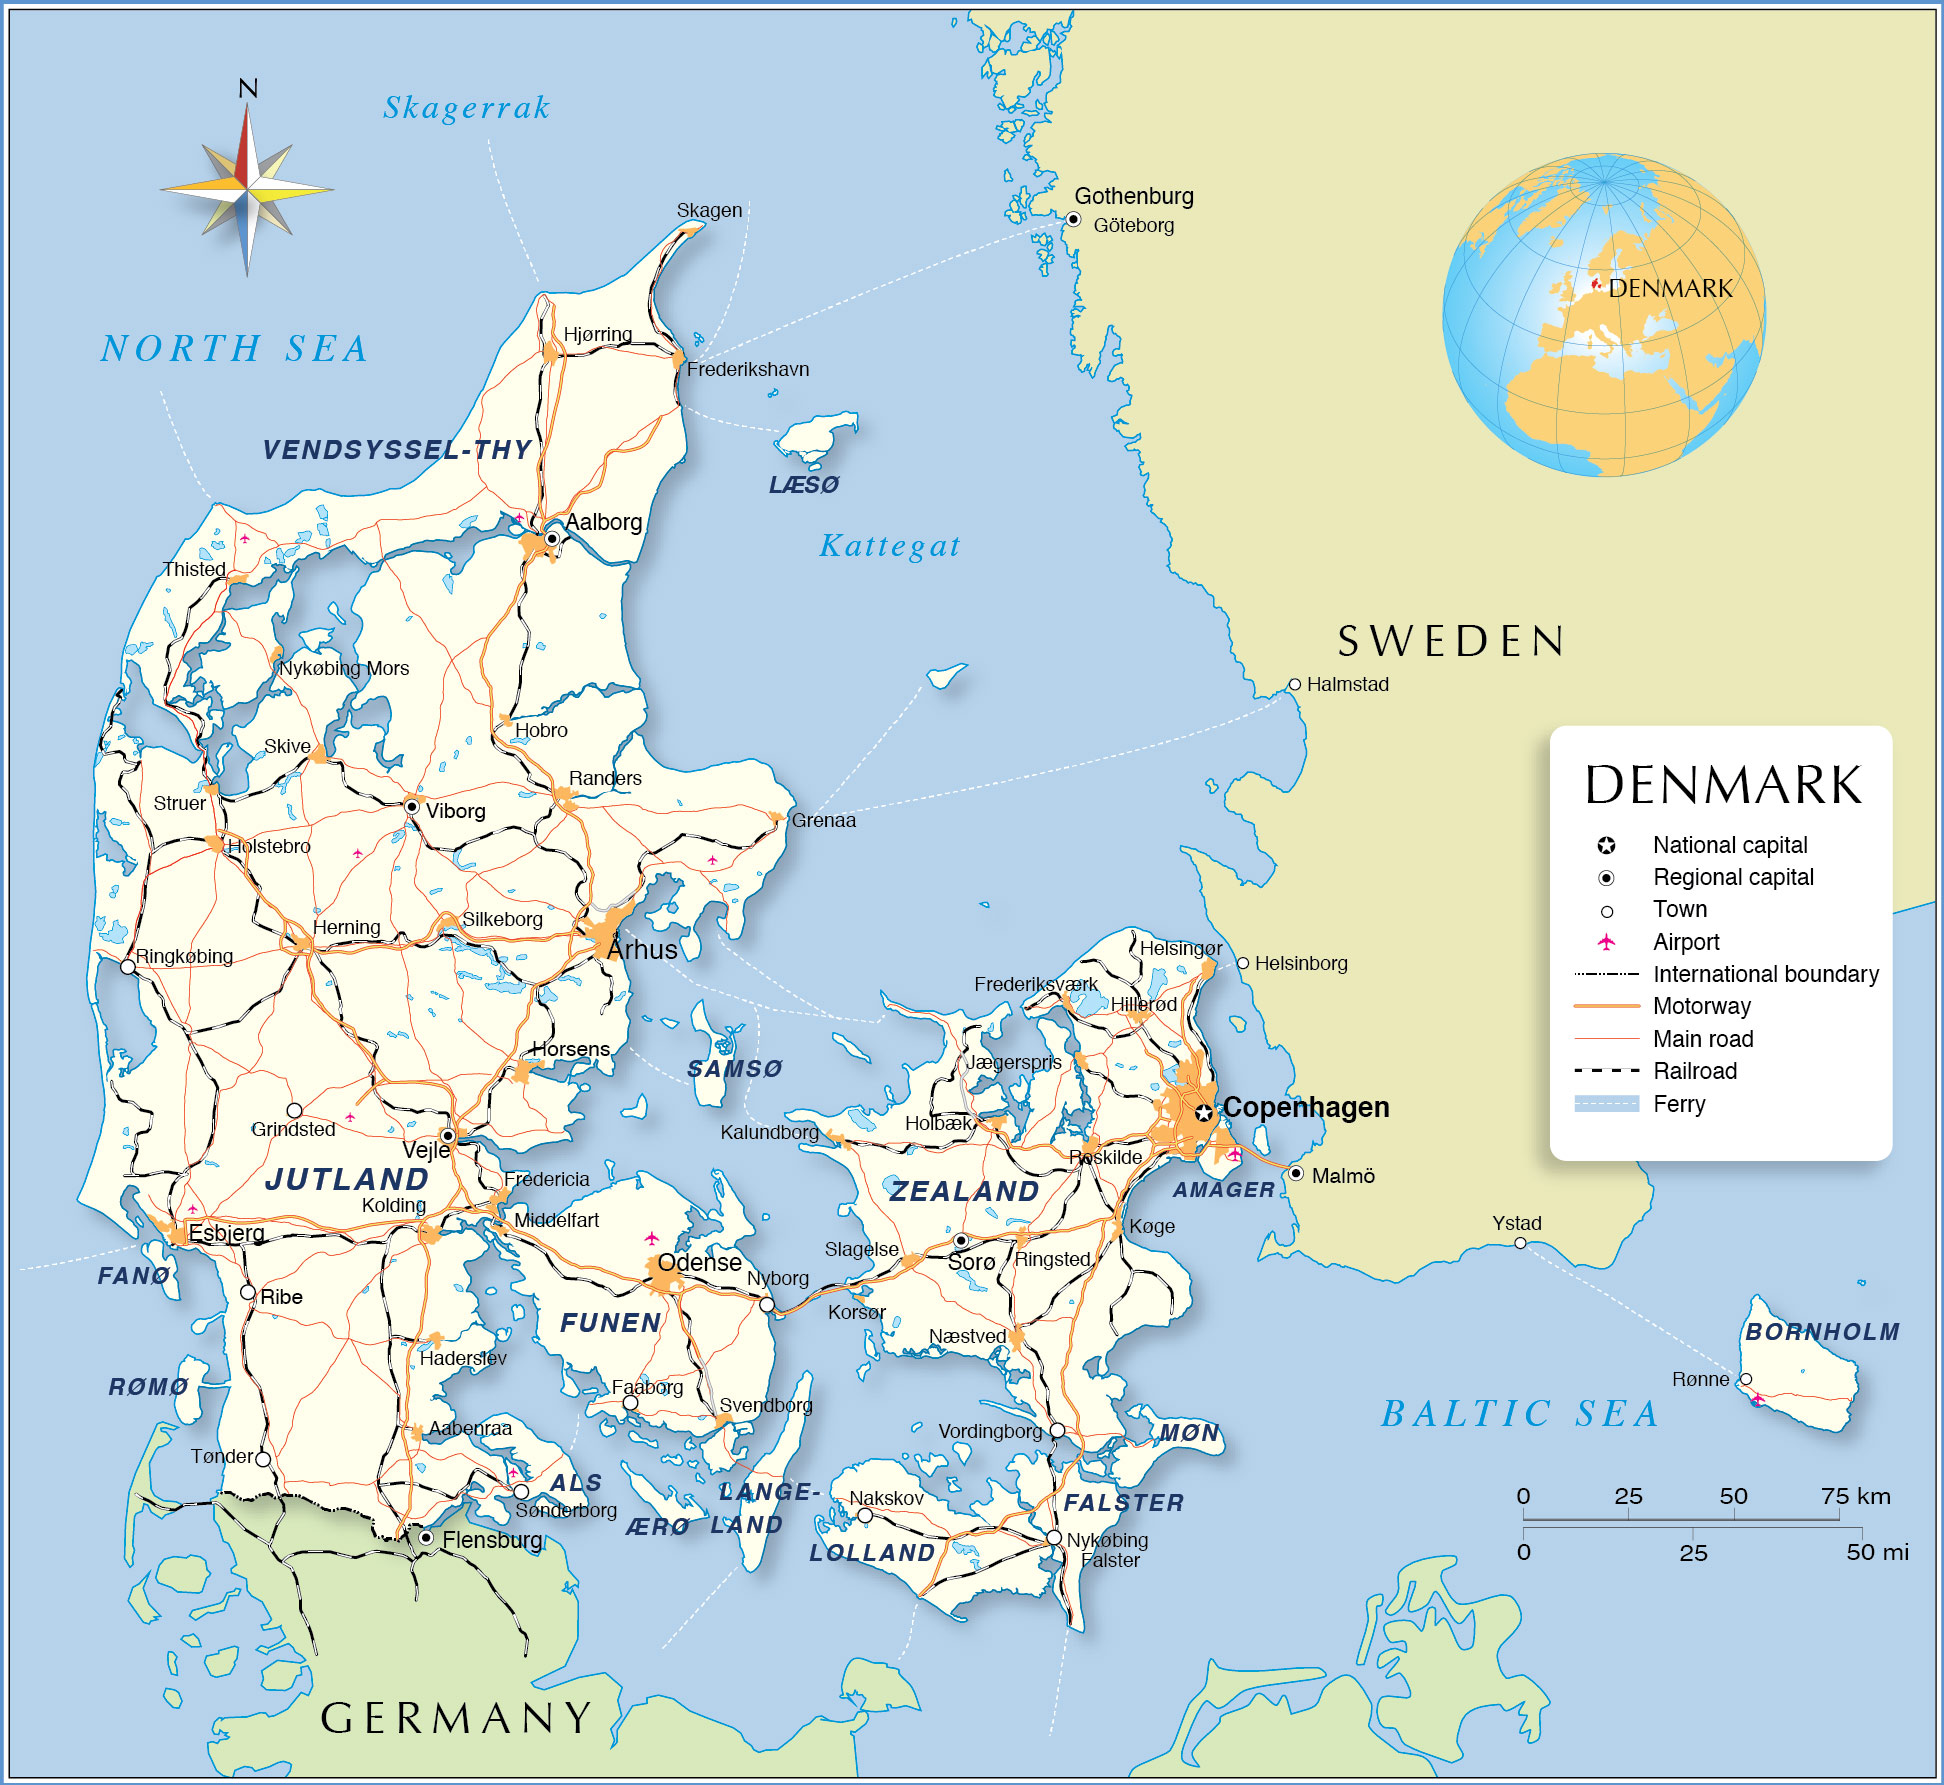 Map Of Denmark And Surrounding Areas Political Map of Denmark   Nations Online Project